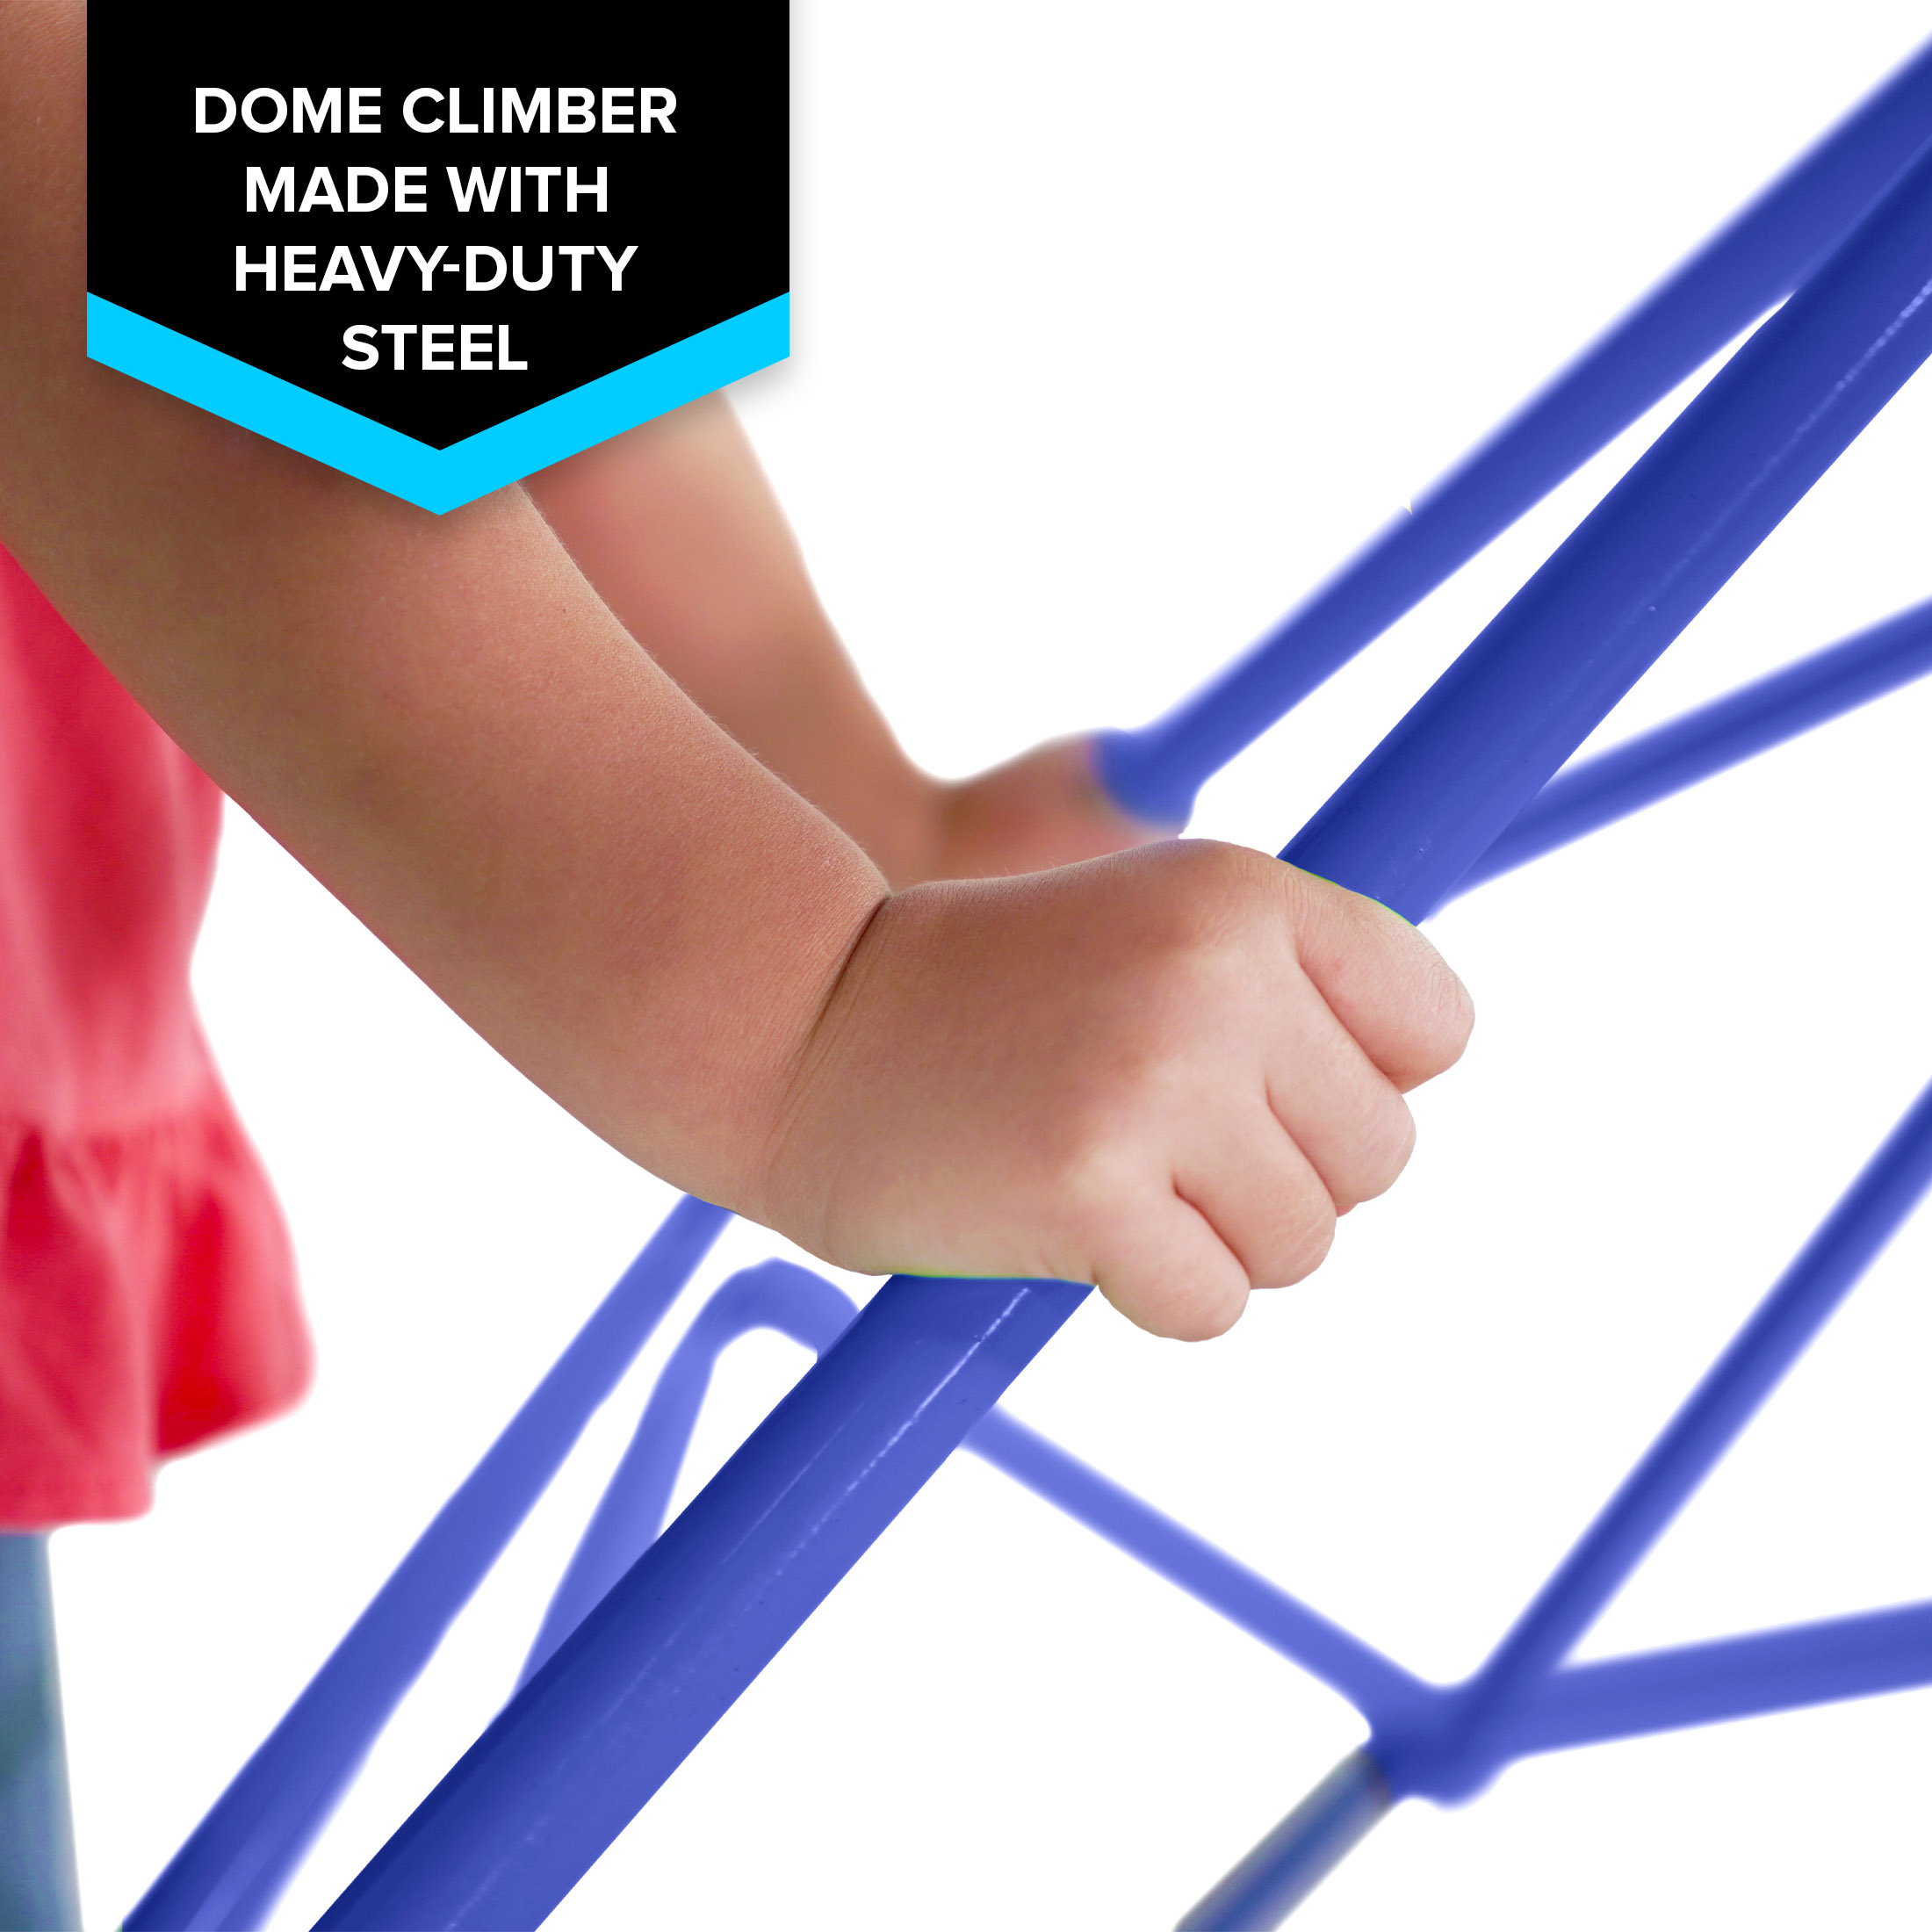 Sportspower Dome Climber with Cover - image 5 of 10